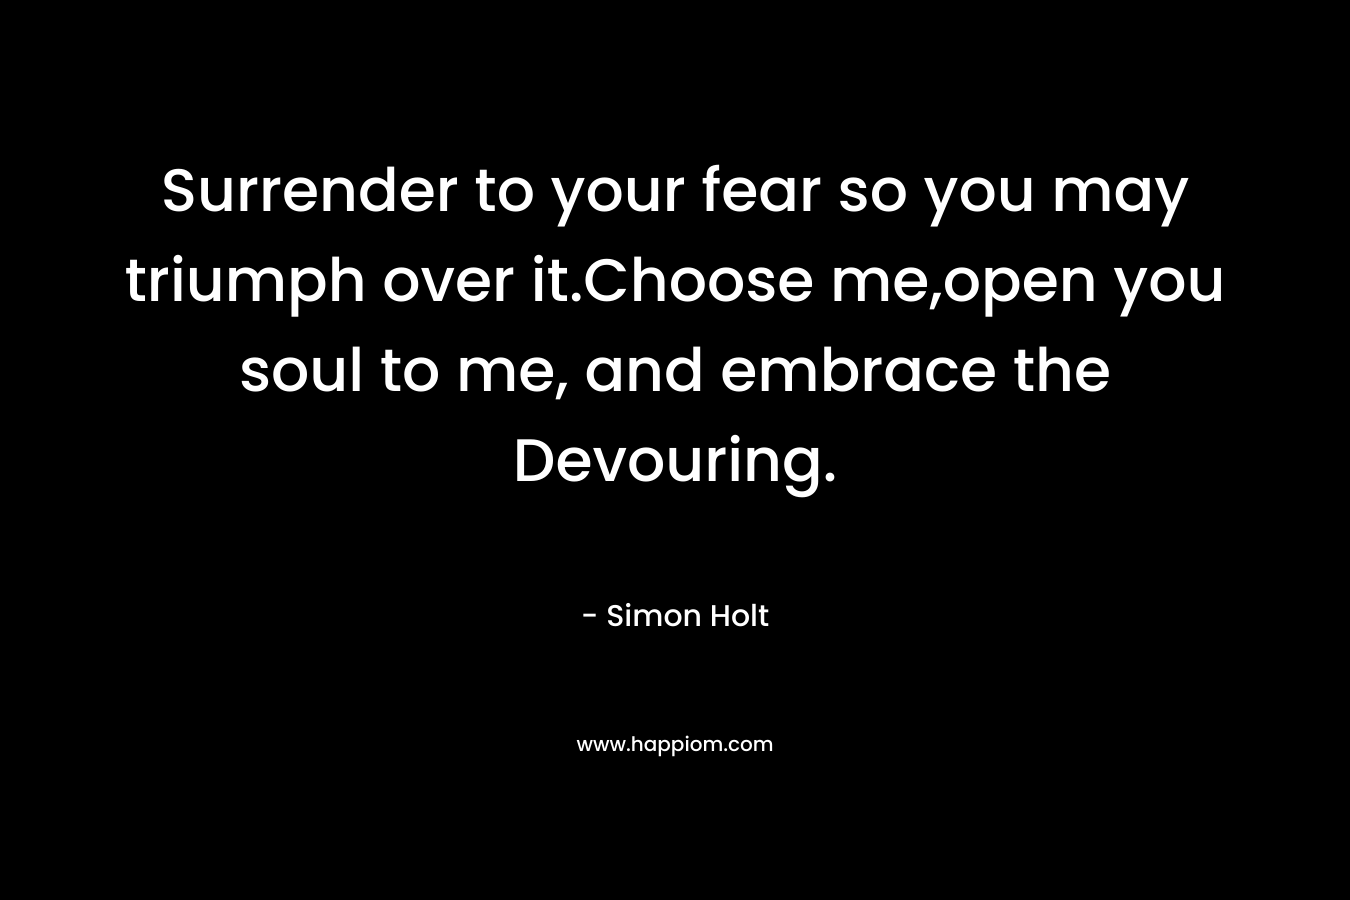 Surrender to your fear so you may triumph over it.Choose me,open you soul to me, and embrace the Devouring.